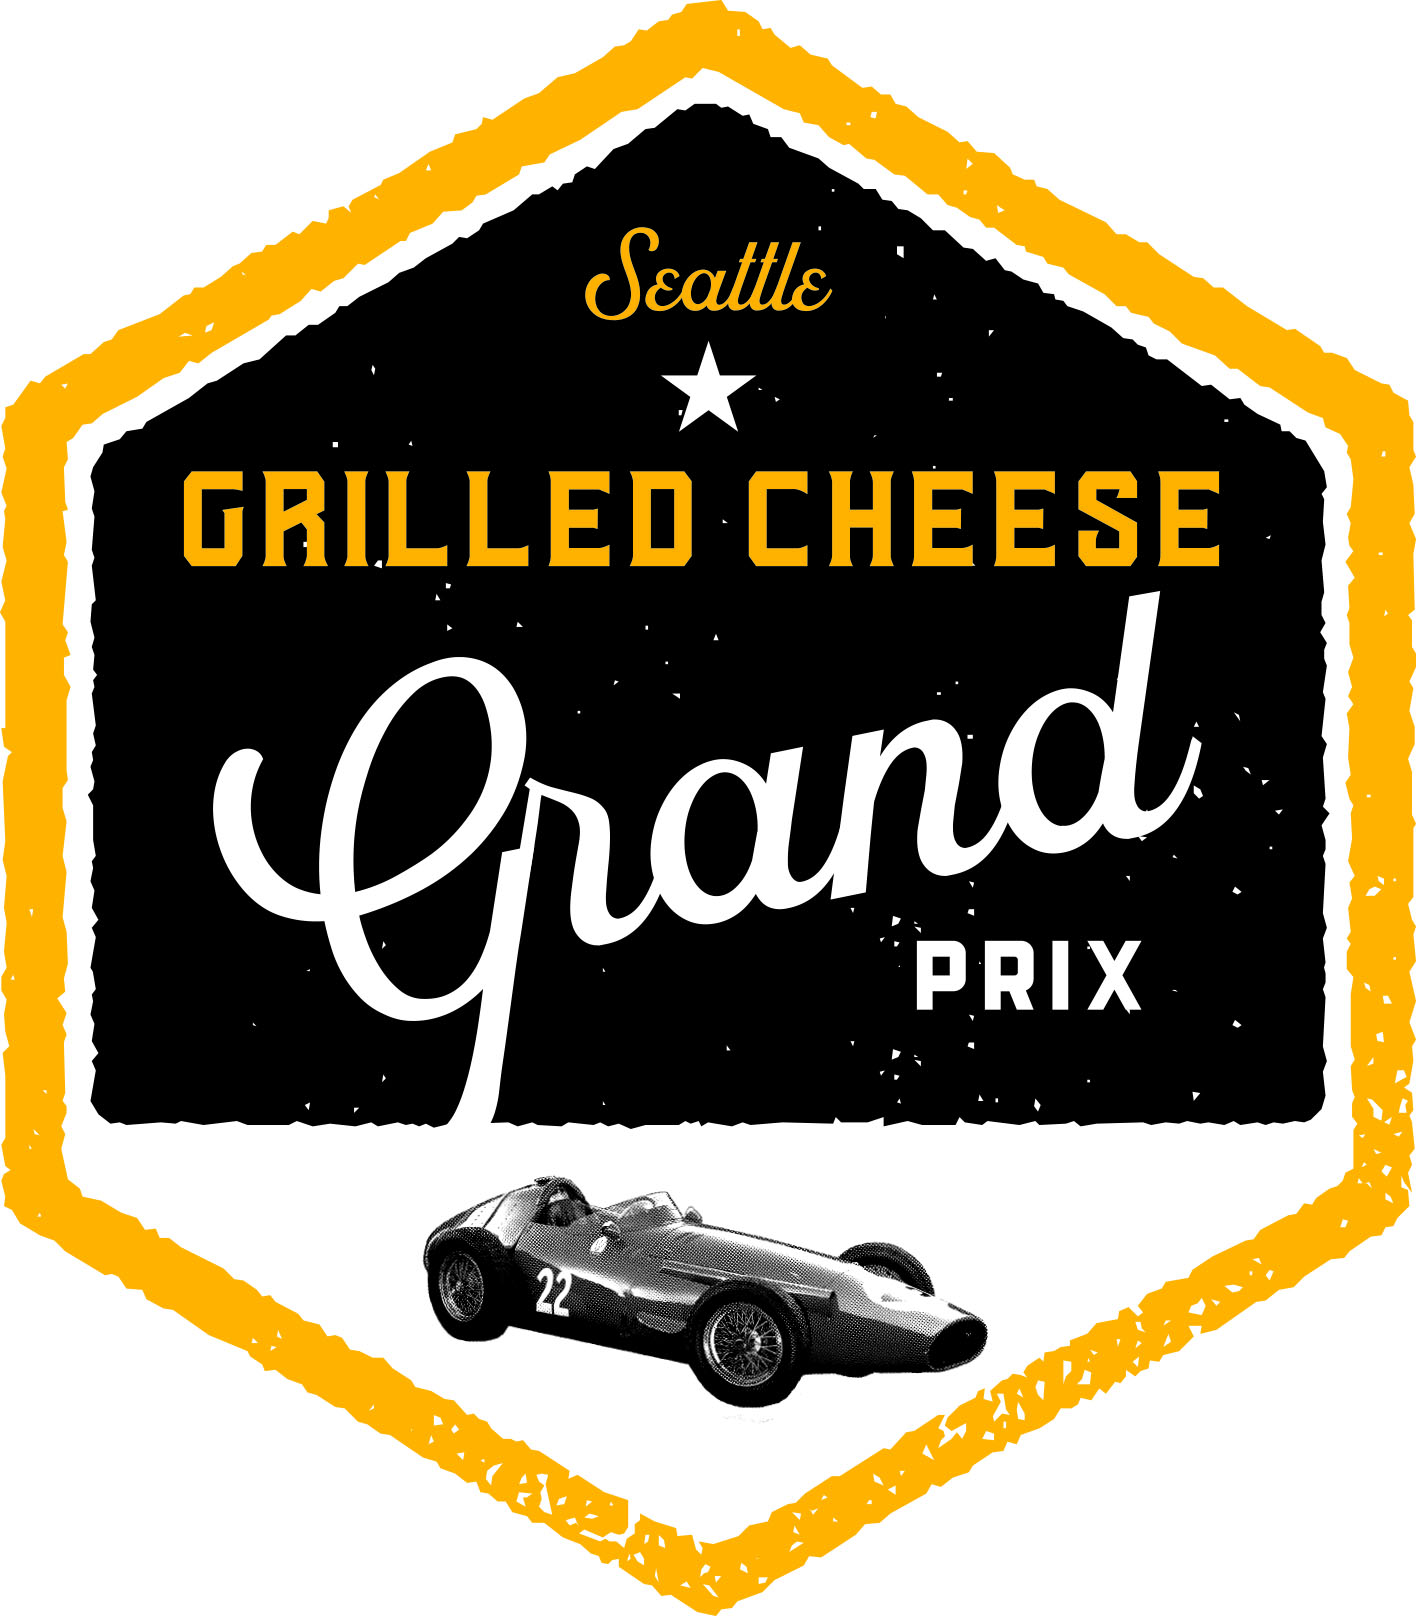 Grilled Cheese Grand Prix presented by Dairy Farmers of Washington